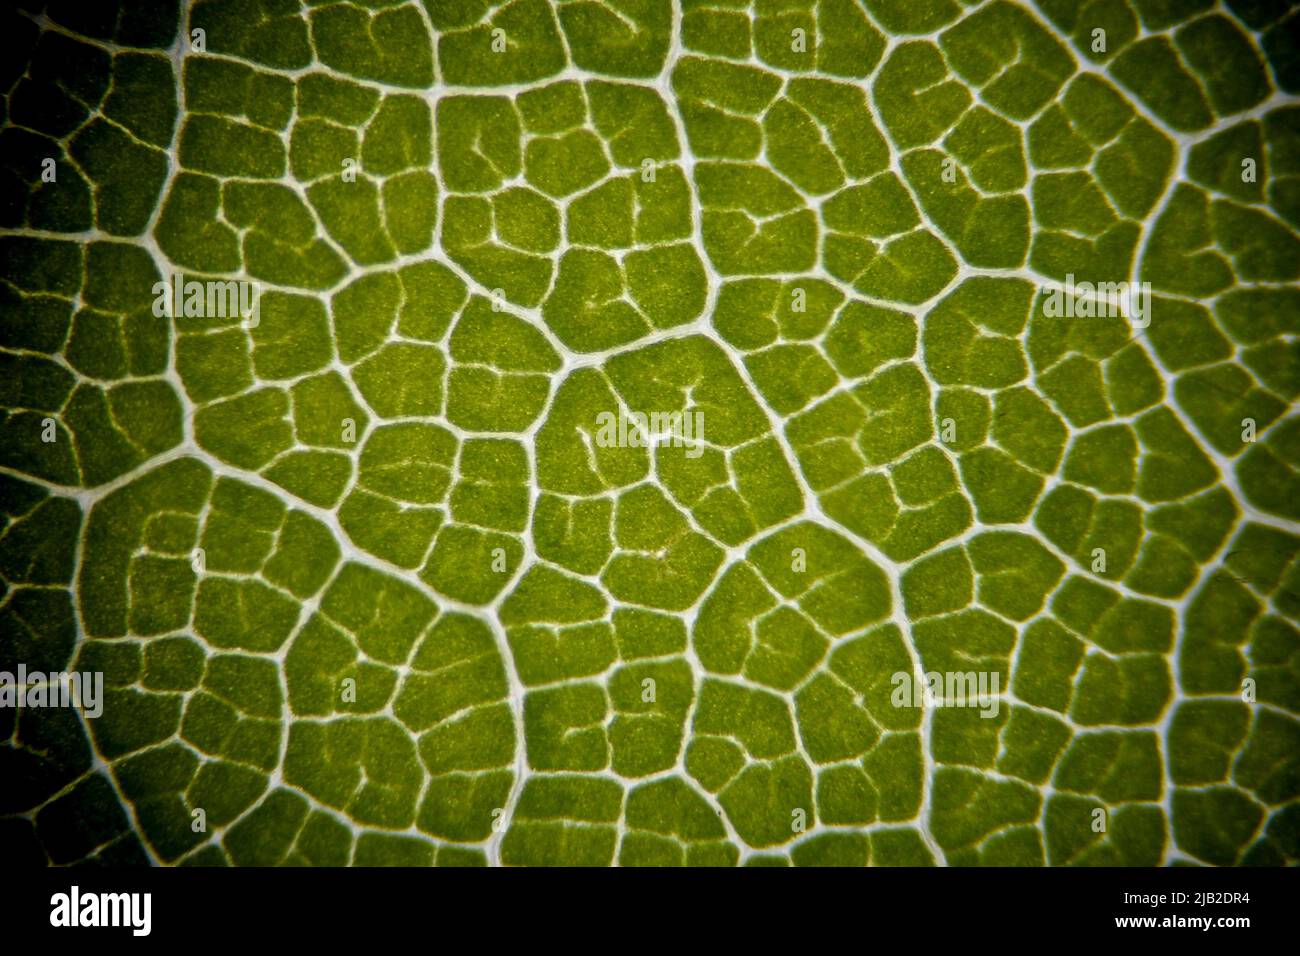 Microscope image of a leaf from a Beech hedge, showing the pattern of chloroplasts     Frame size c5mm across Stock Photo